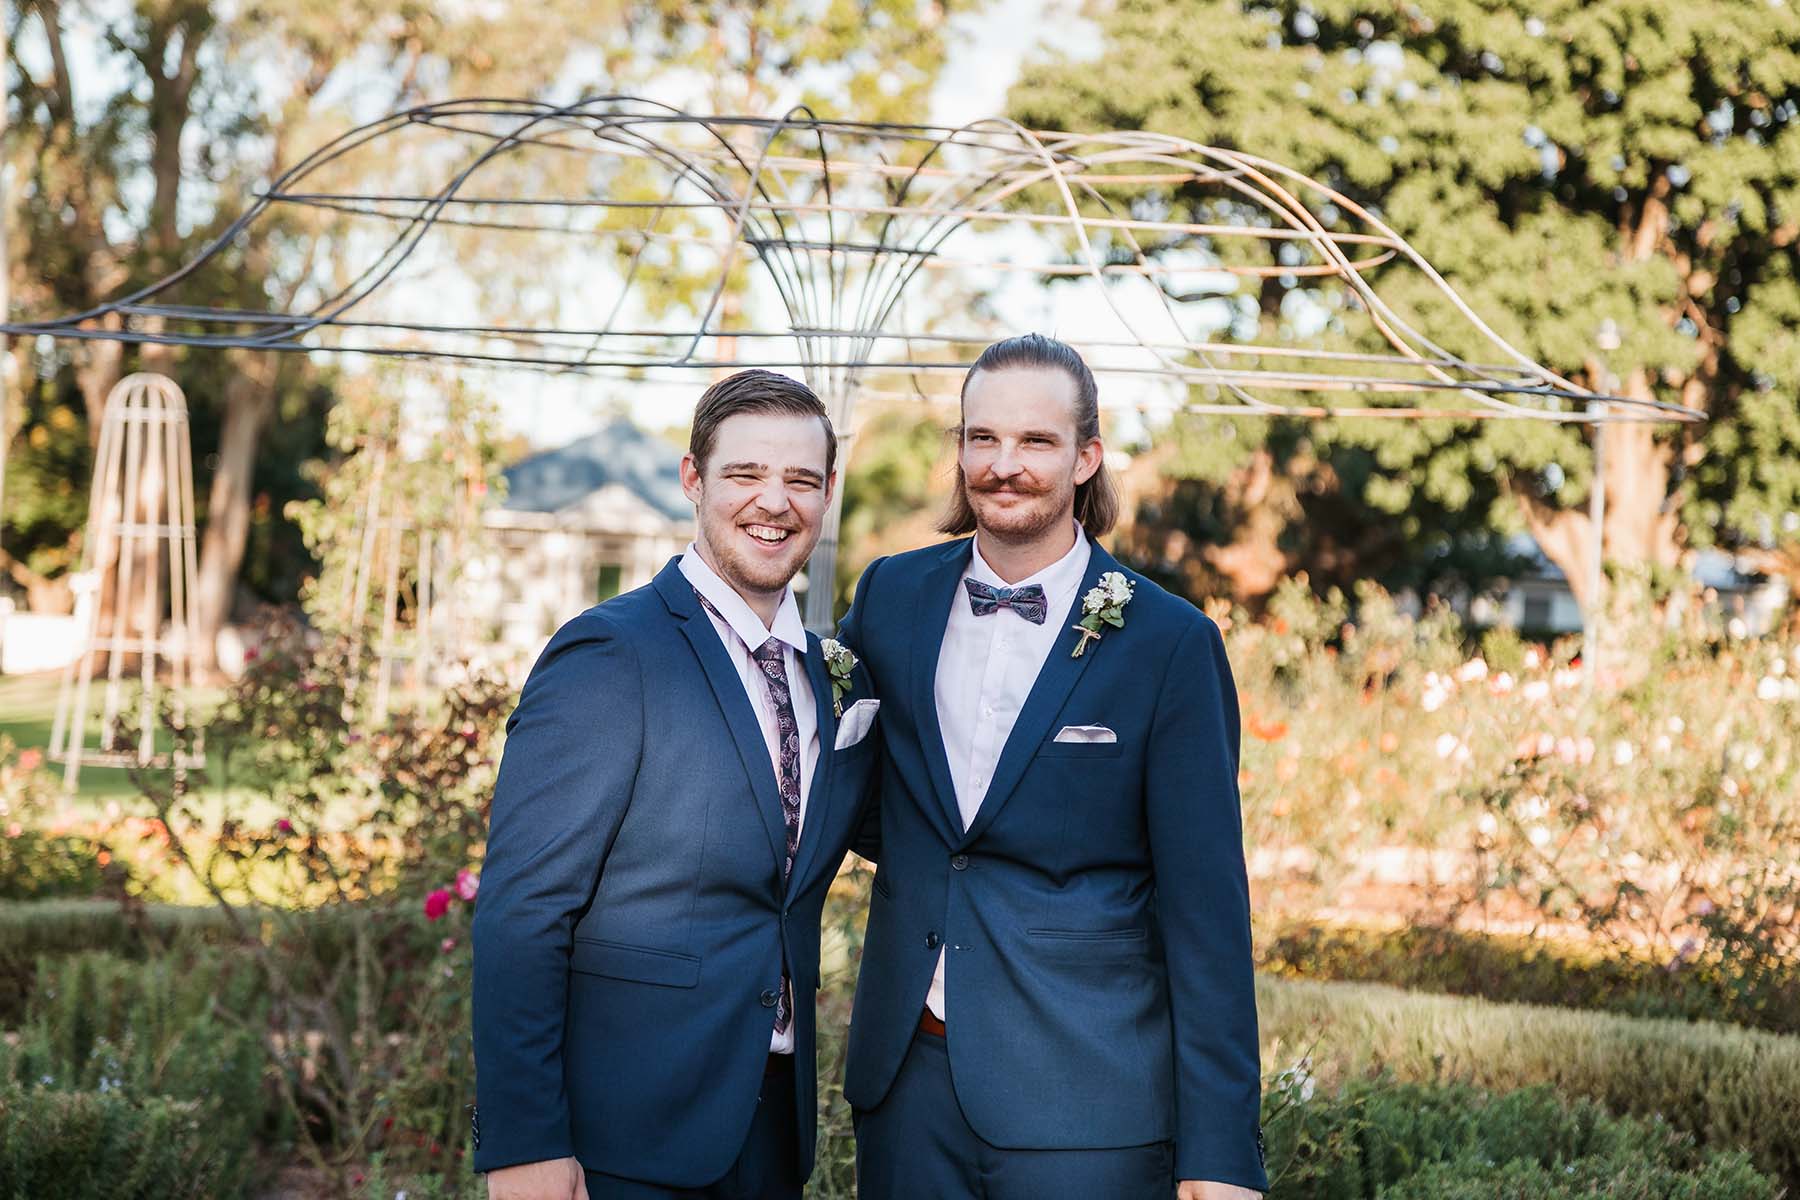 Wedding Photography – groom and best man